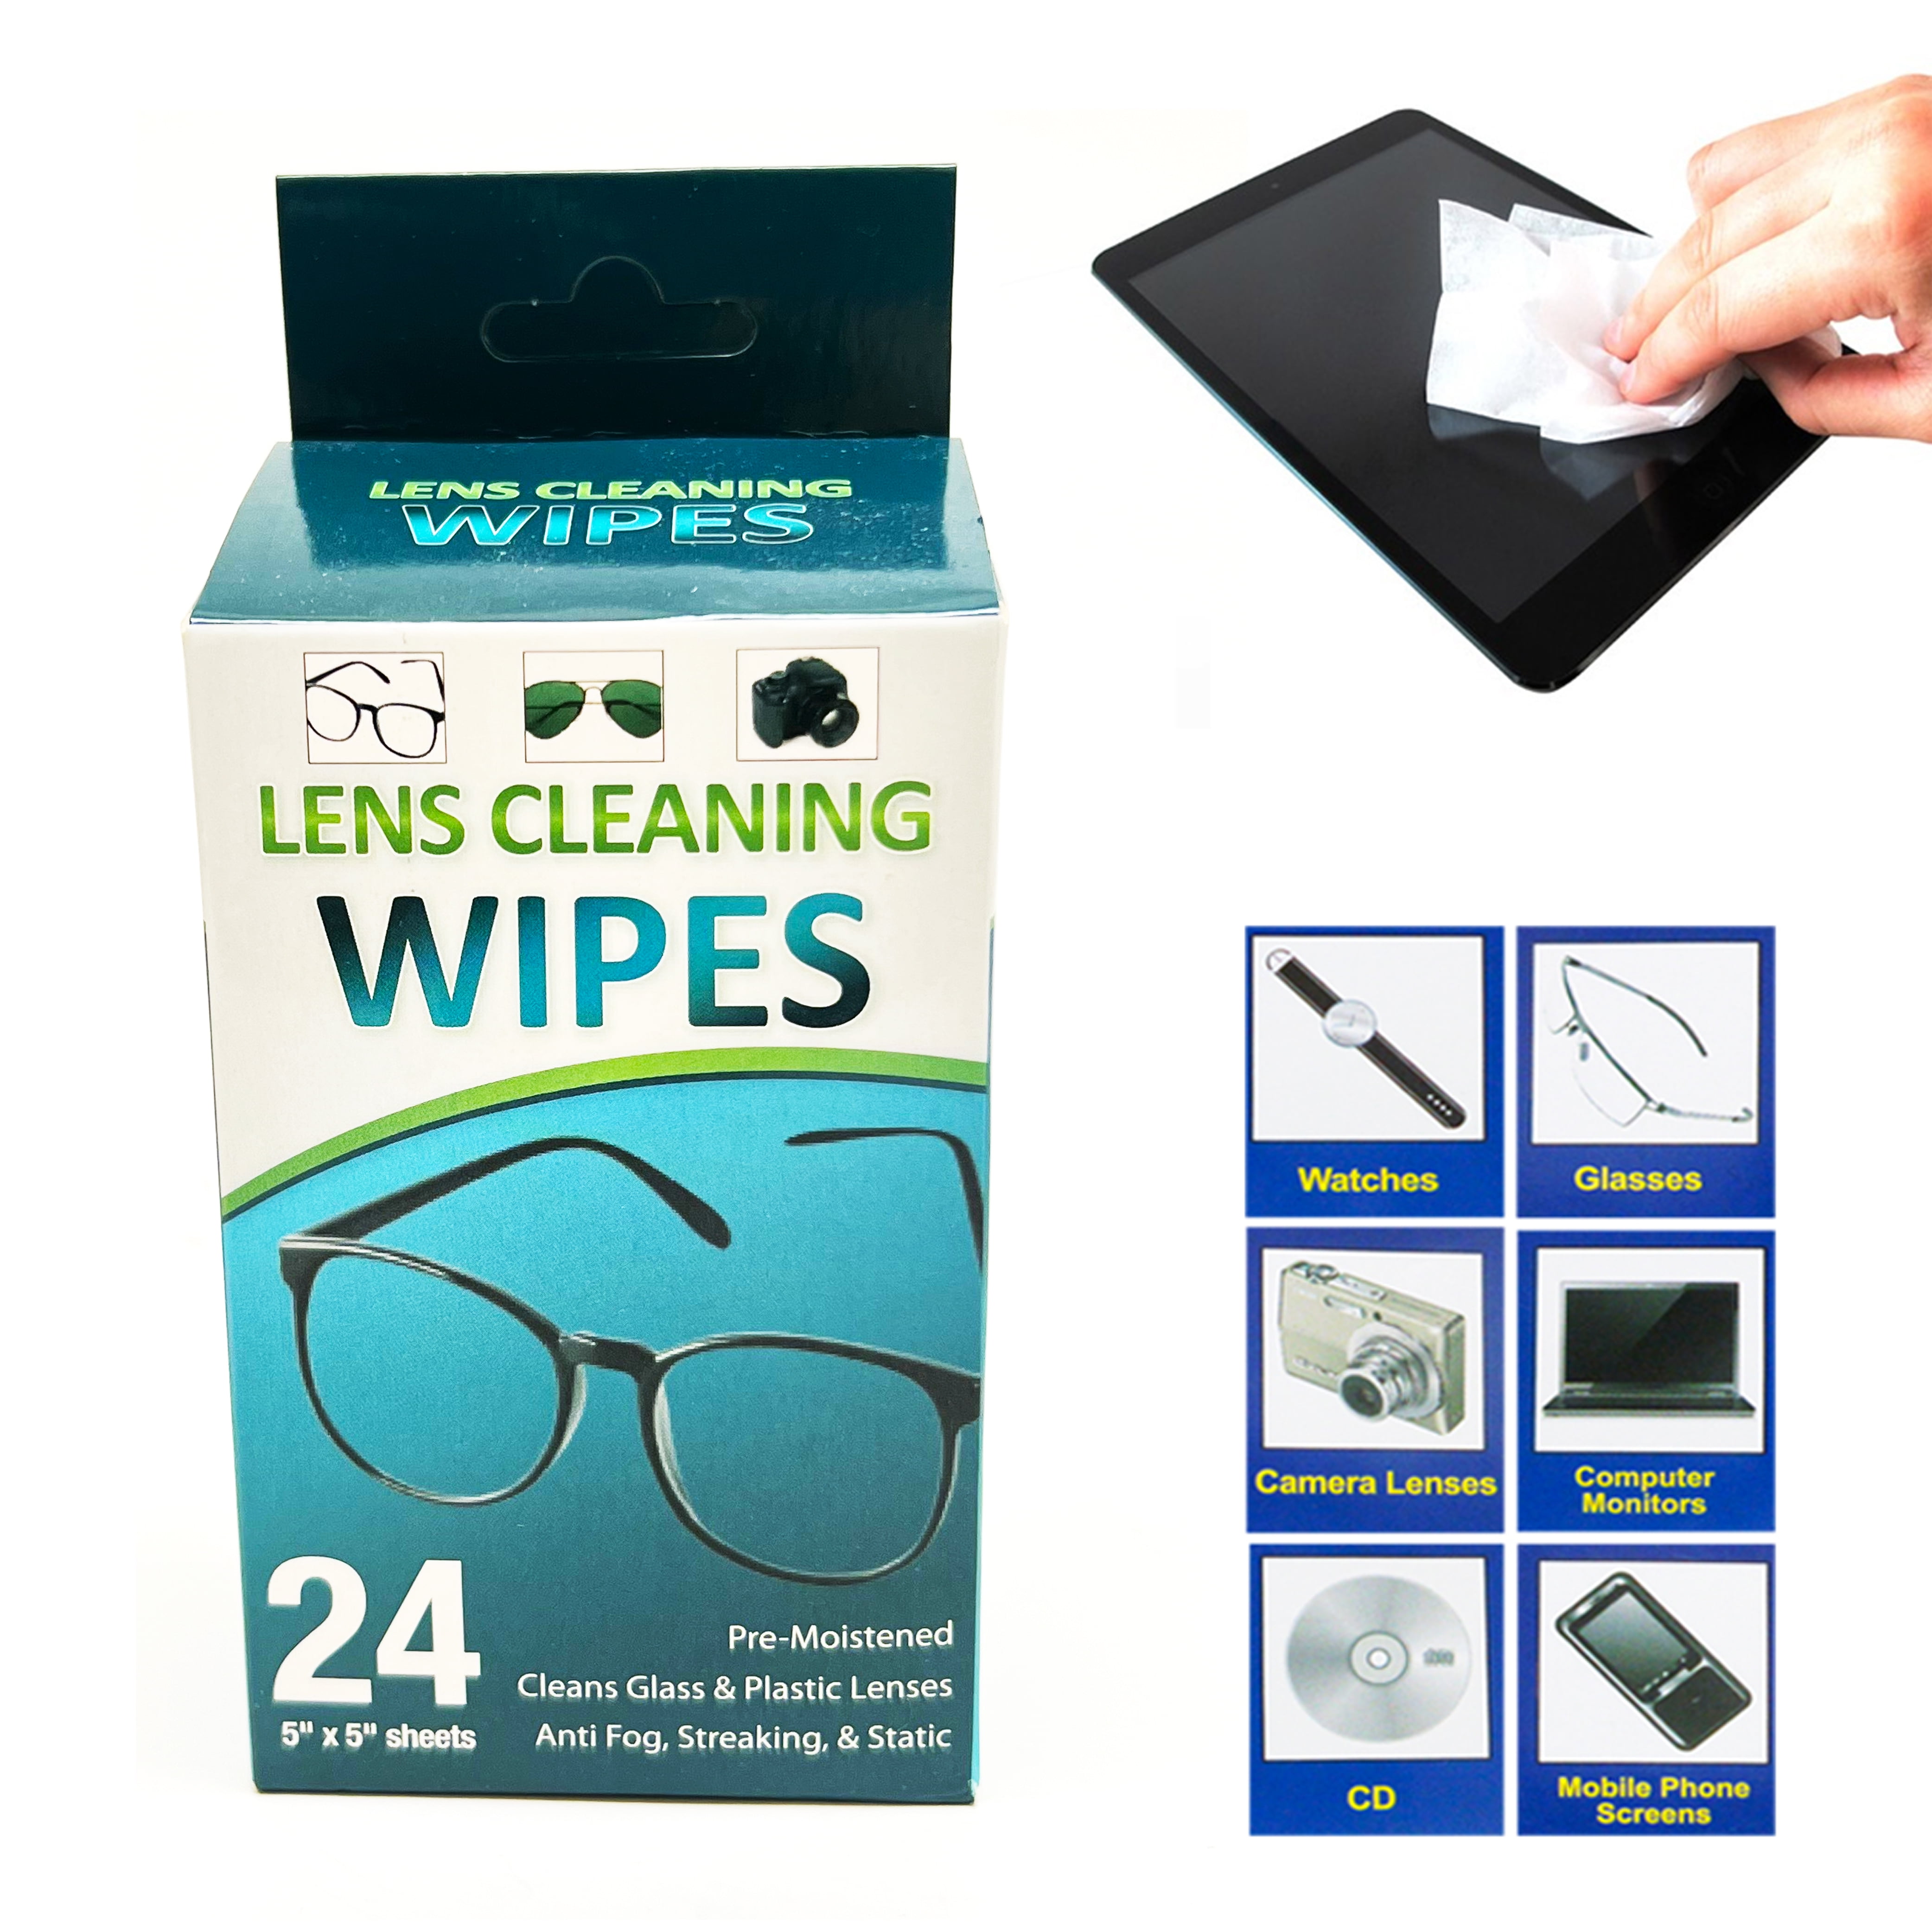 Cleaning wipes for VEDO CHIARO glasses, 16 wipes